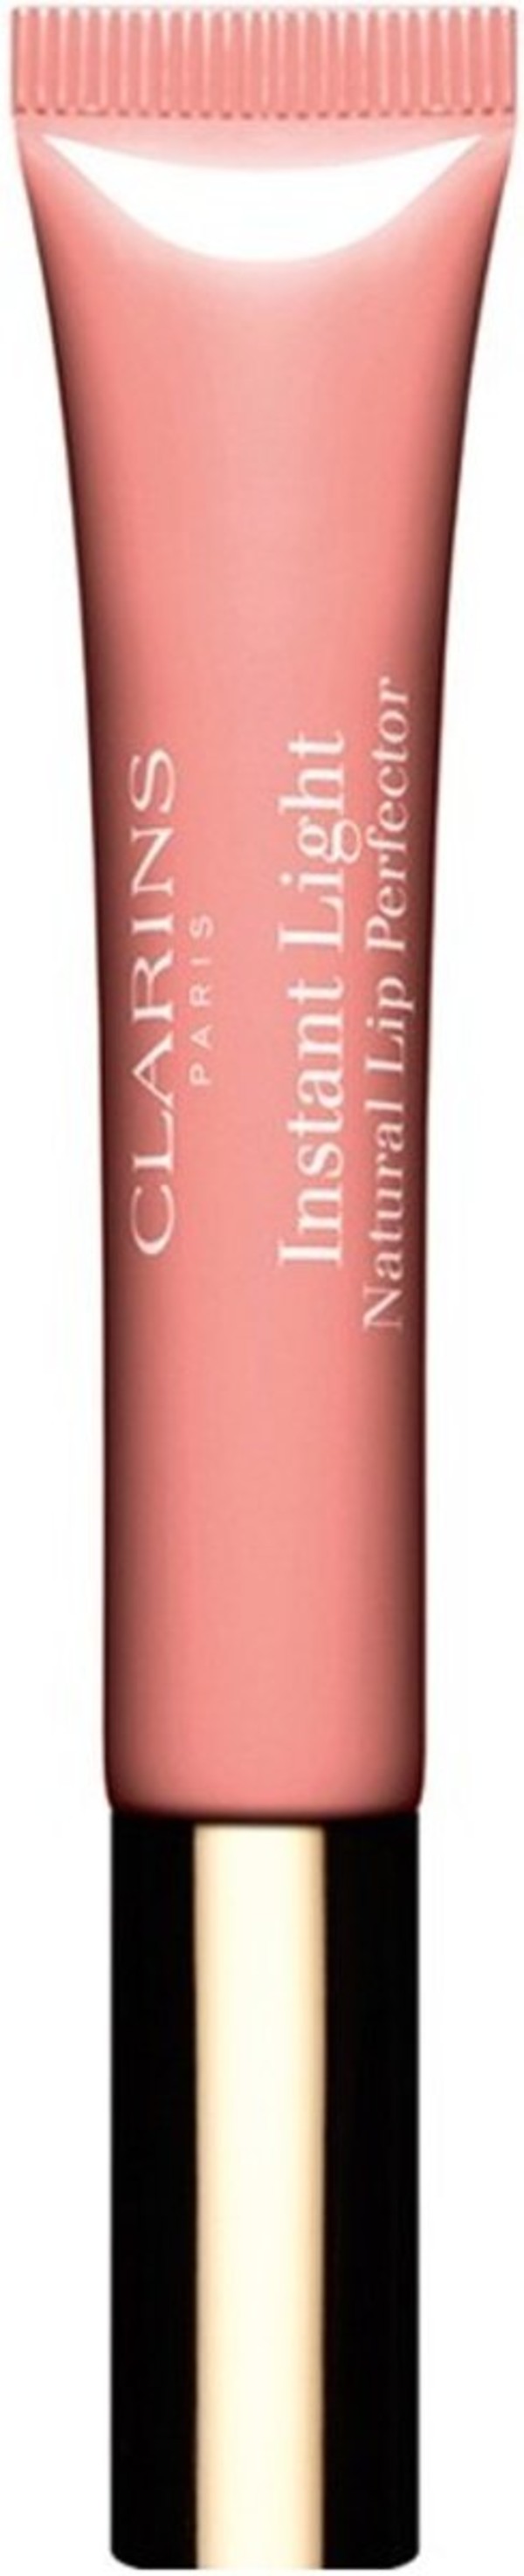 Natural Lip Perfector 05 Candy Shimmer Błyszczyk do ust